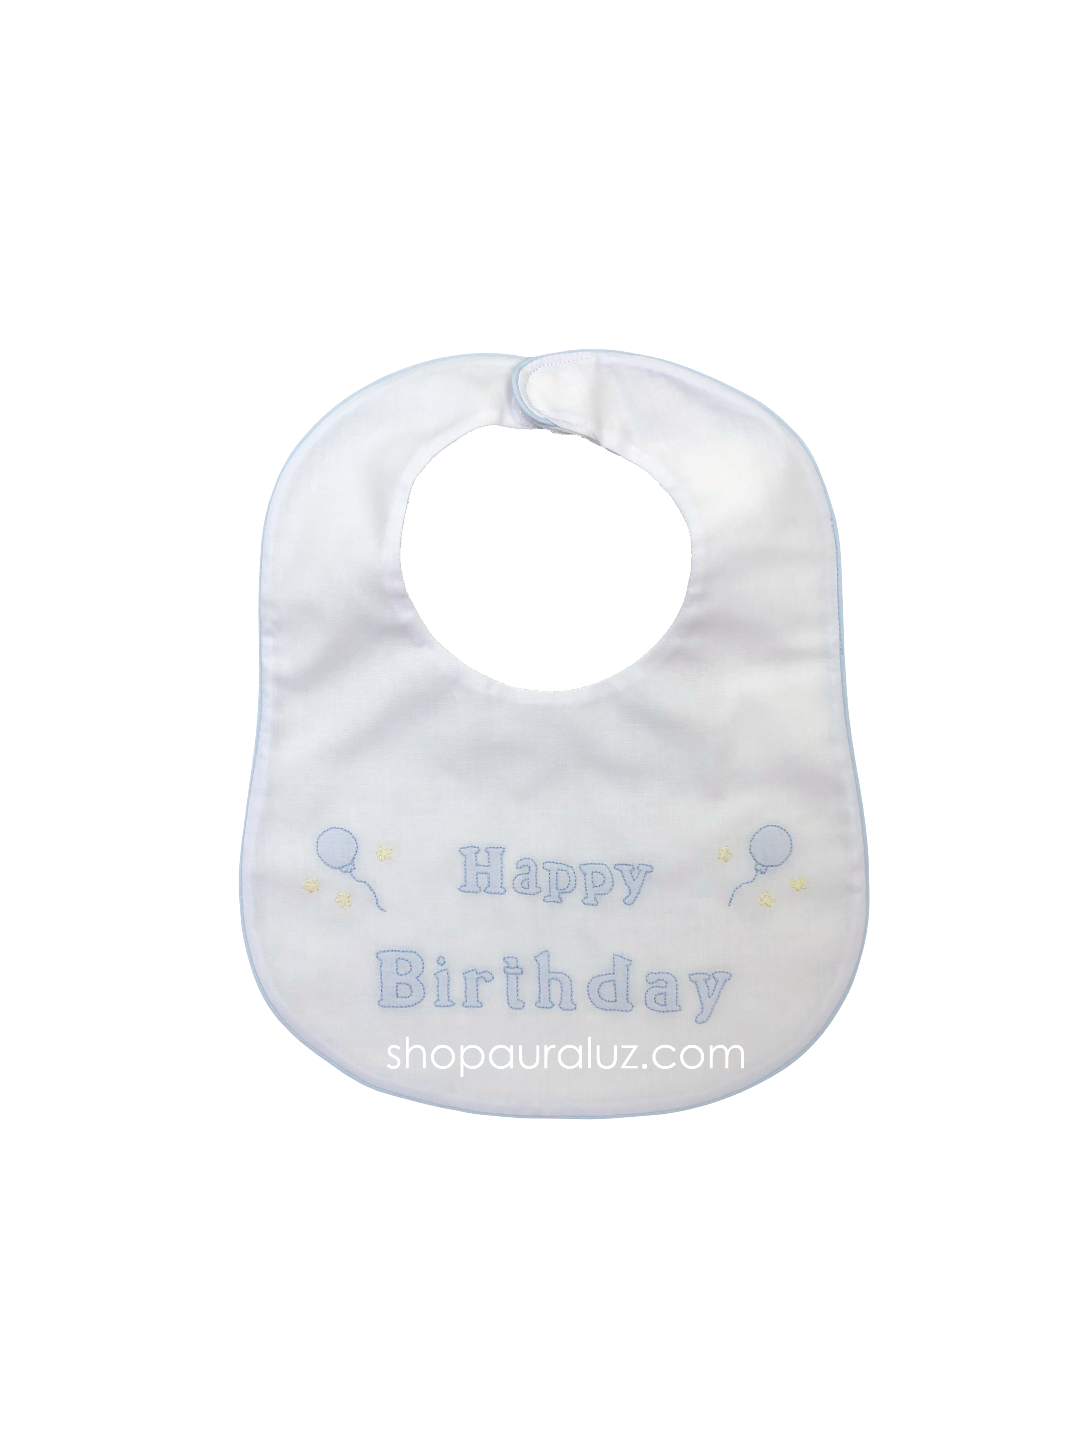 Auraluz Bib...White with blue binding trim and embroidered Happy Birthday